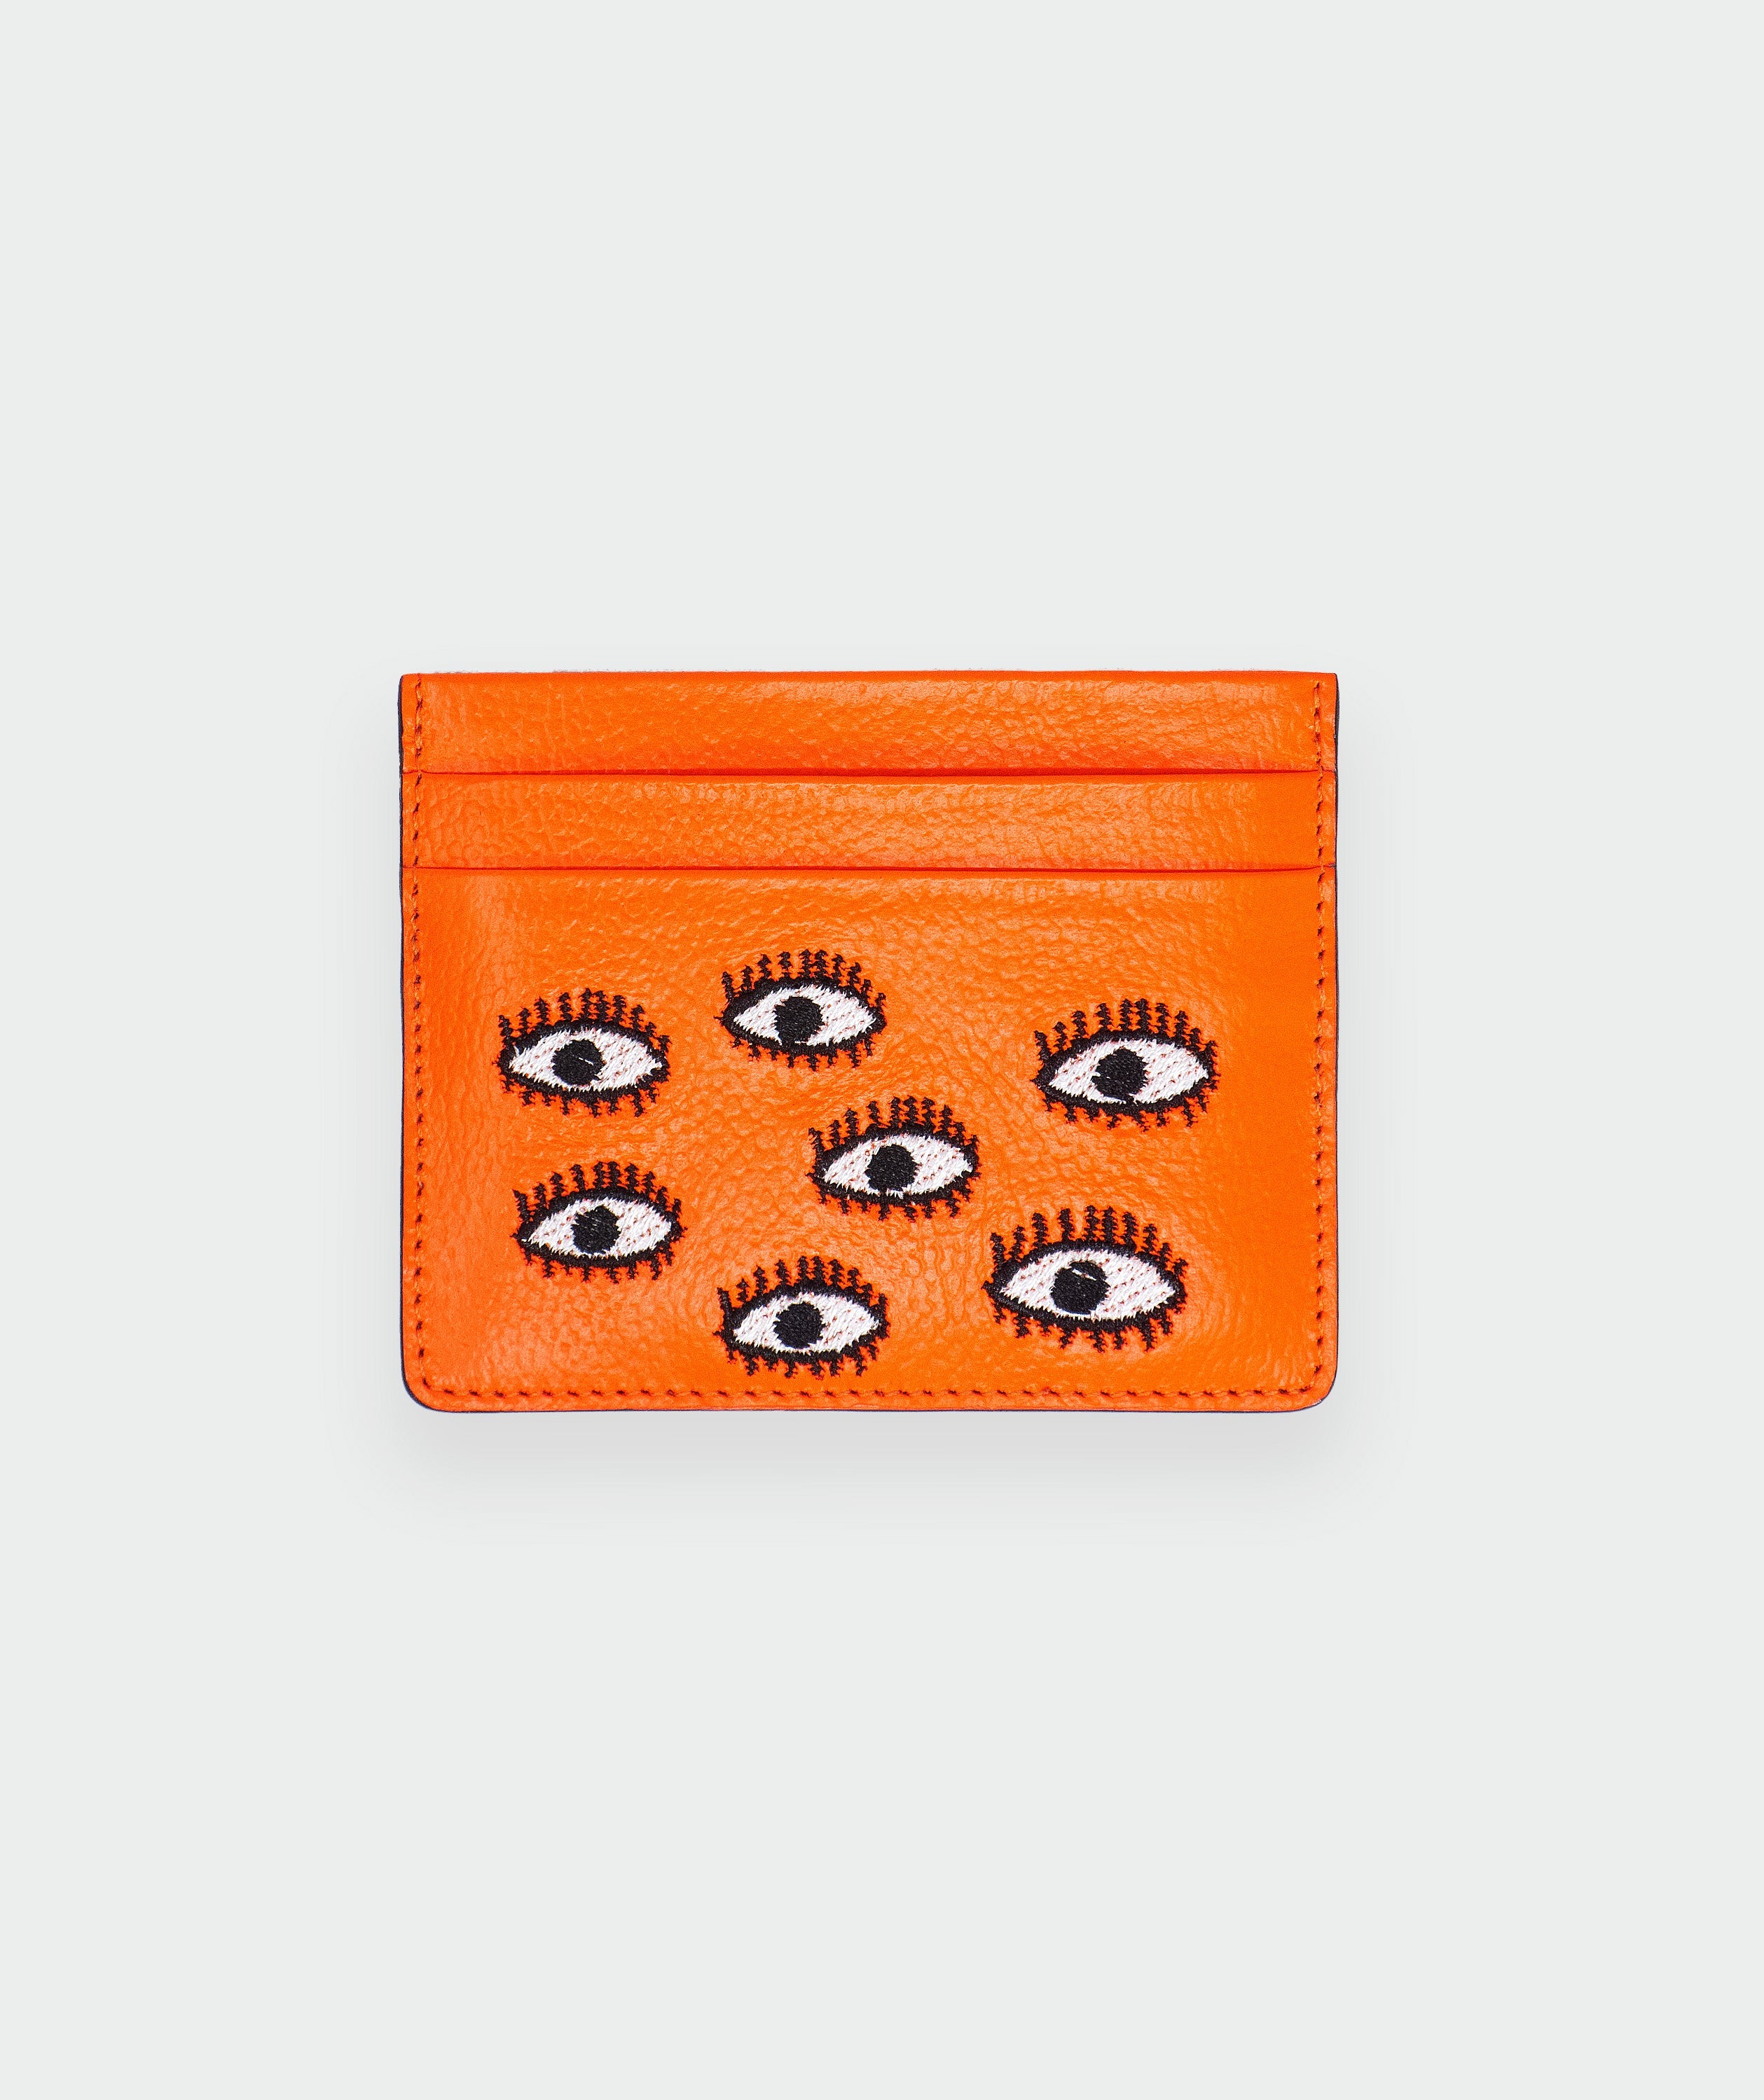 Filium Neon Orange Leather Cardholder - All Over Eyes Embroidery - Detail view